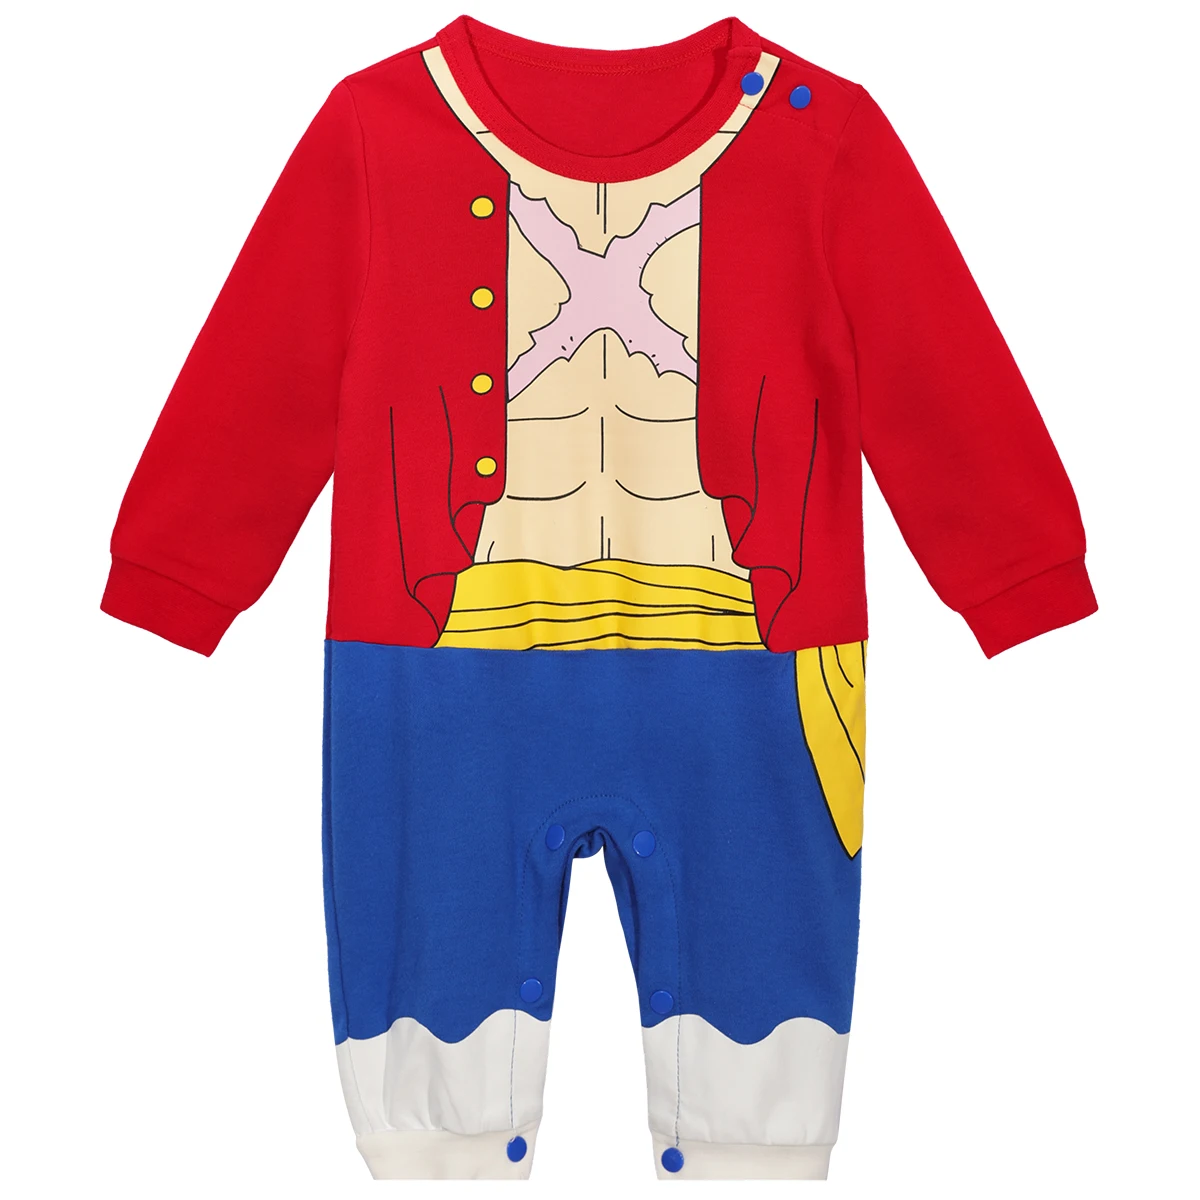 Baby Boys Outfits Romper Infant One Piece Luffy Cosplay Costume Party Playsuit 